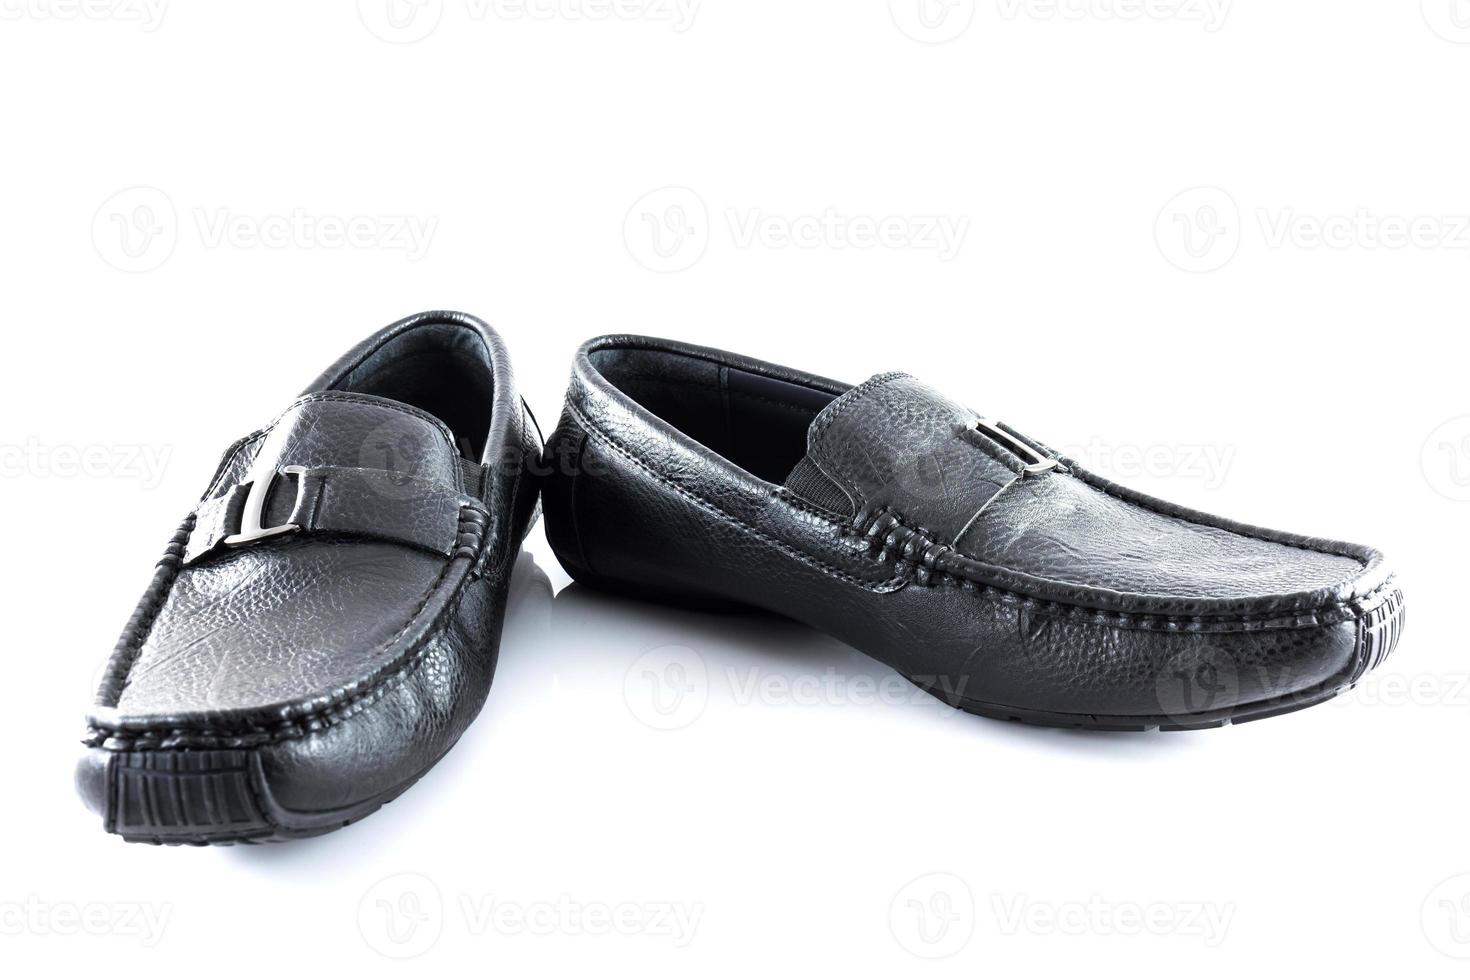 Pair of black male classic shoes on white background photo